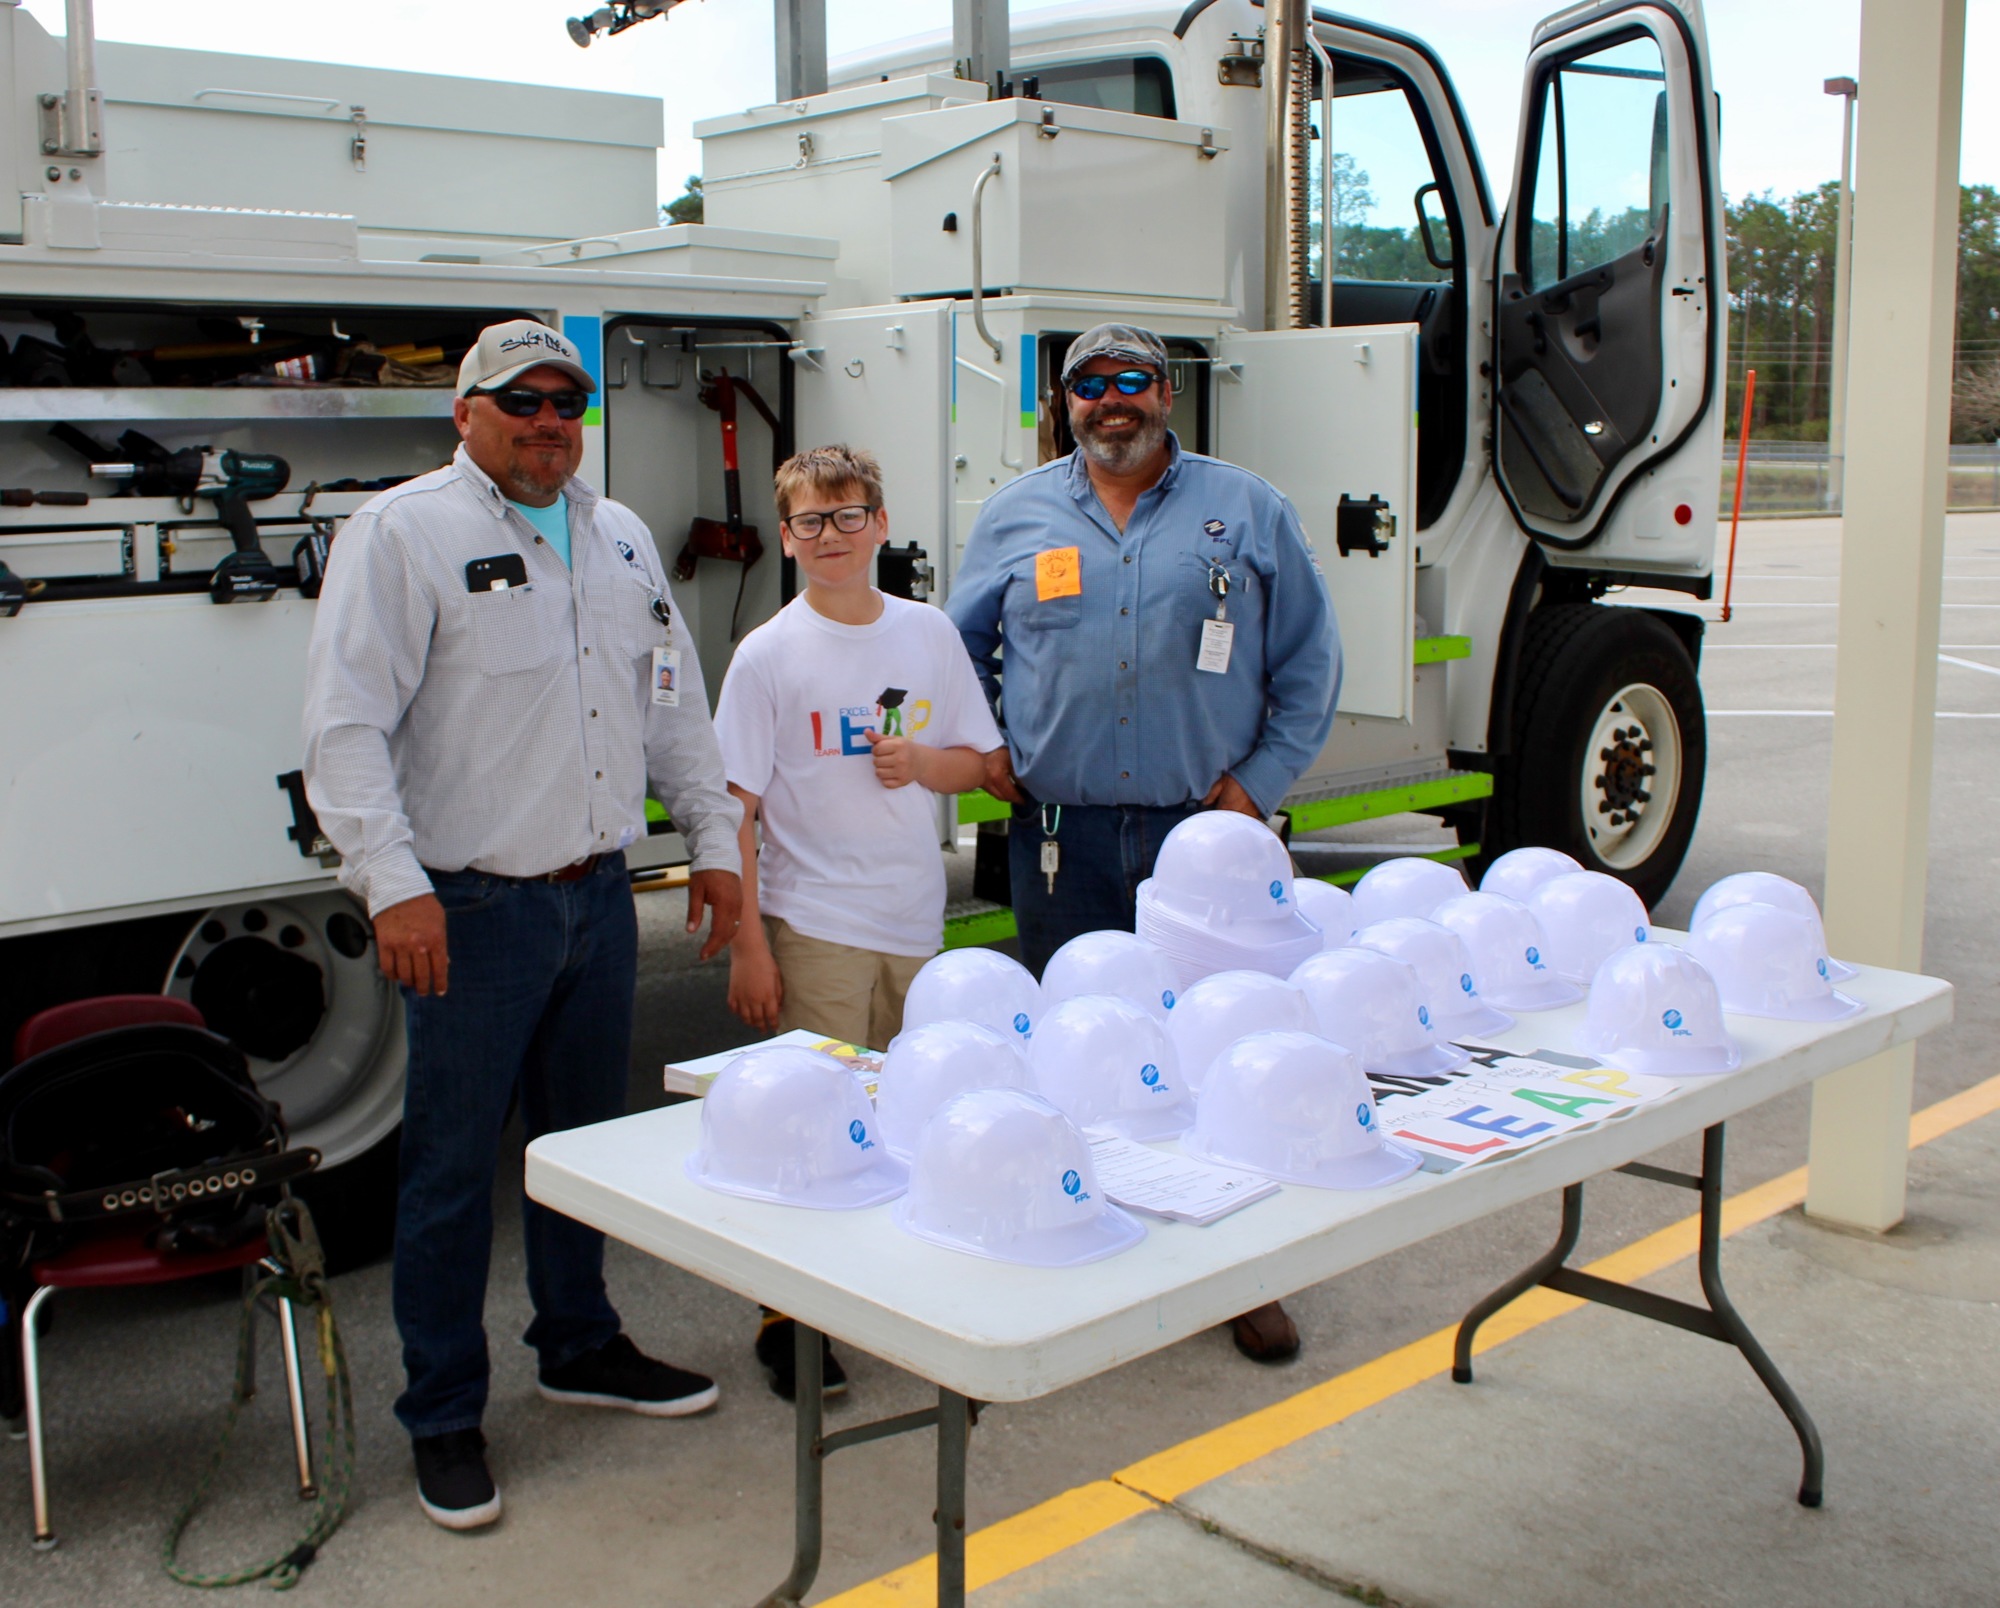 Rymfire Elementary student Caden Cavas meets with the FPL workers at the RES Career Day. Photo courtesy of Melanie Tahan